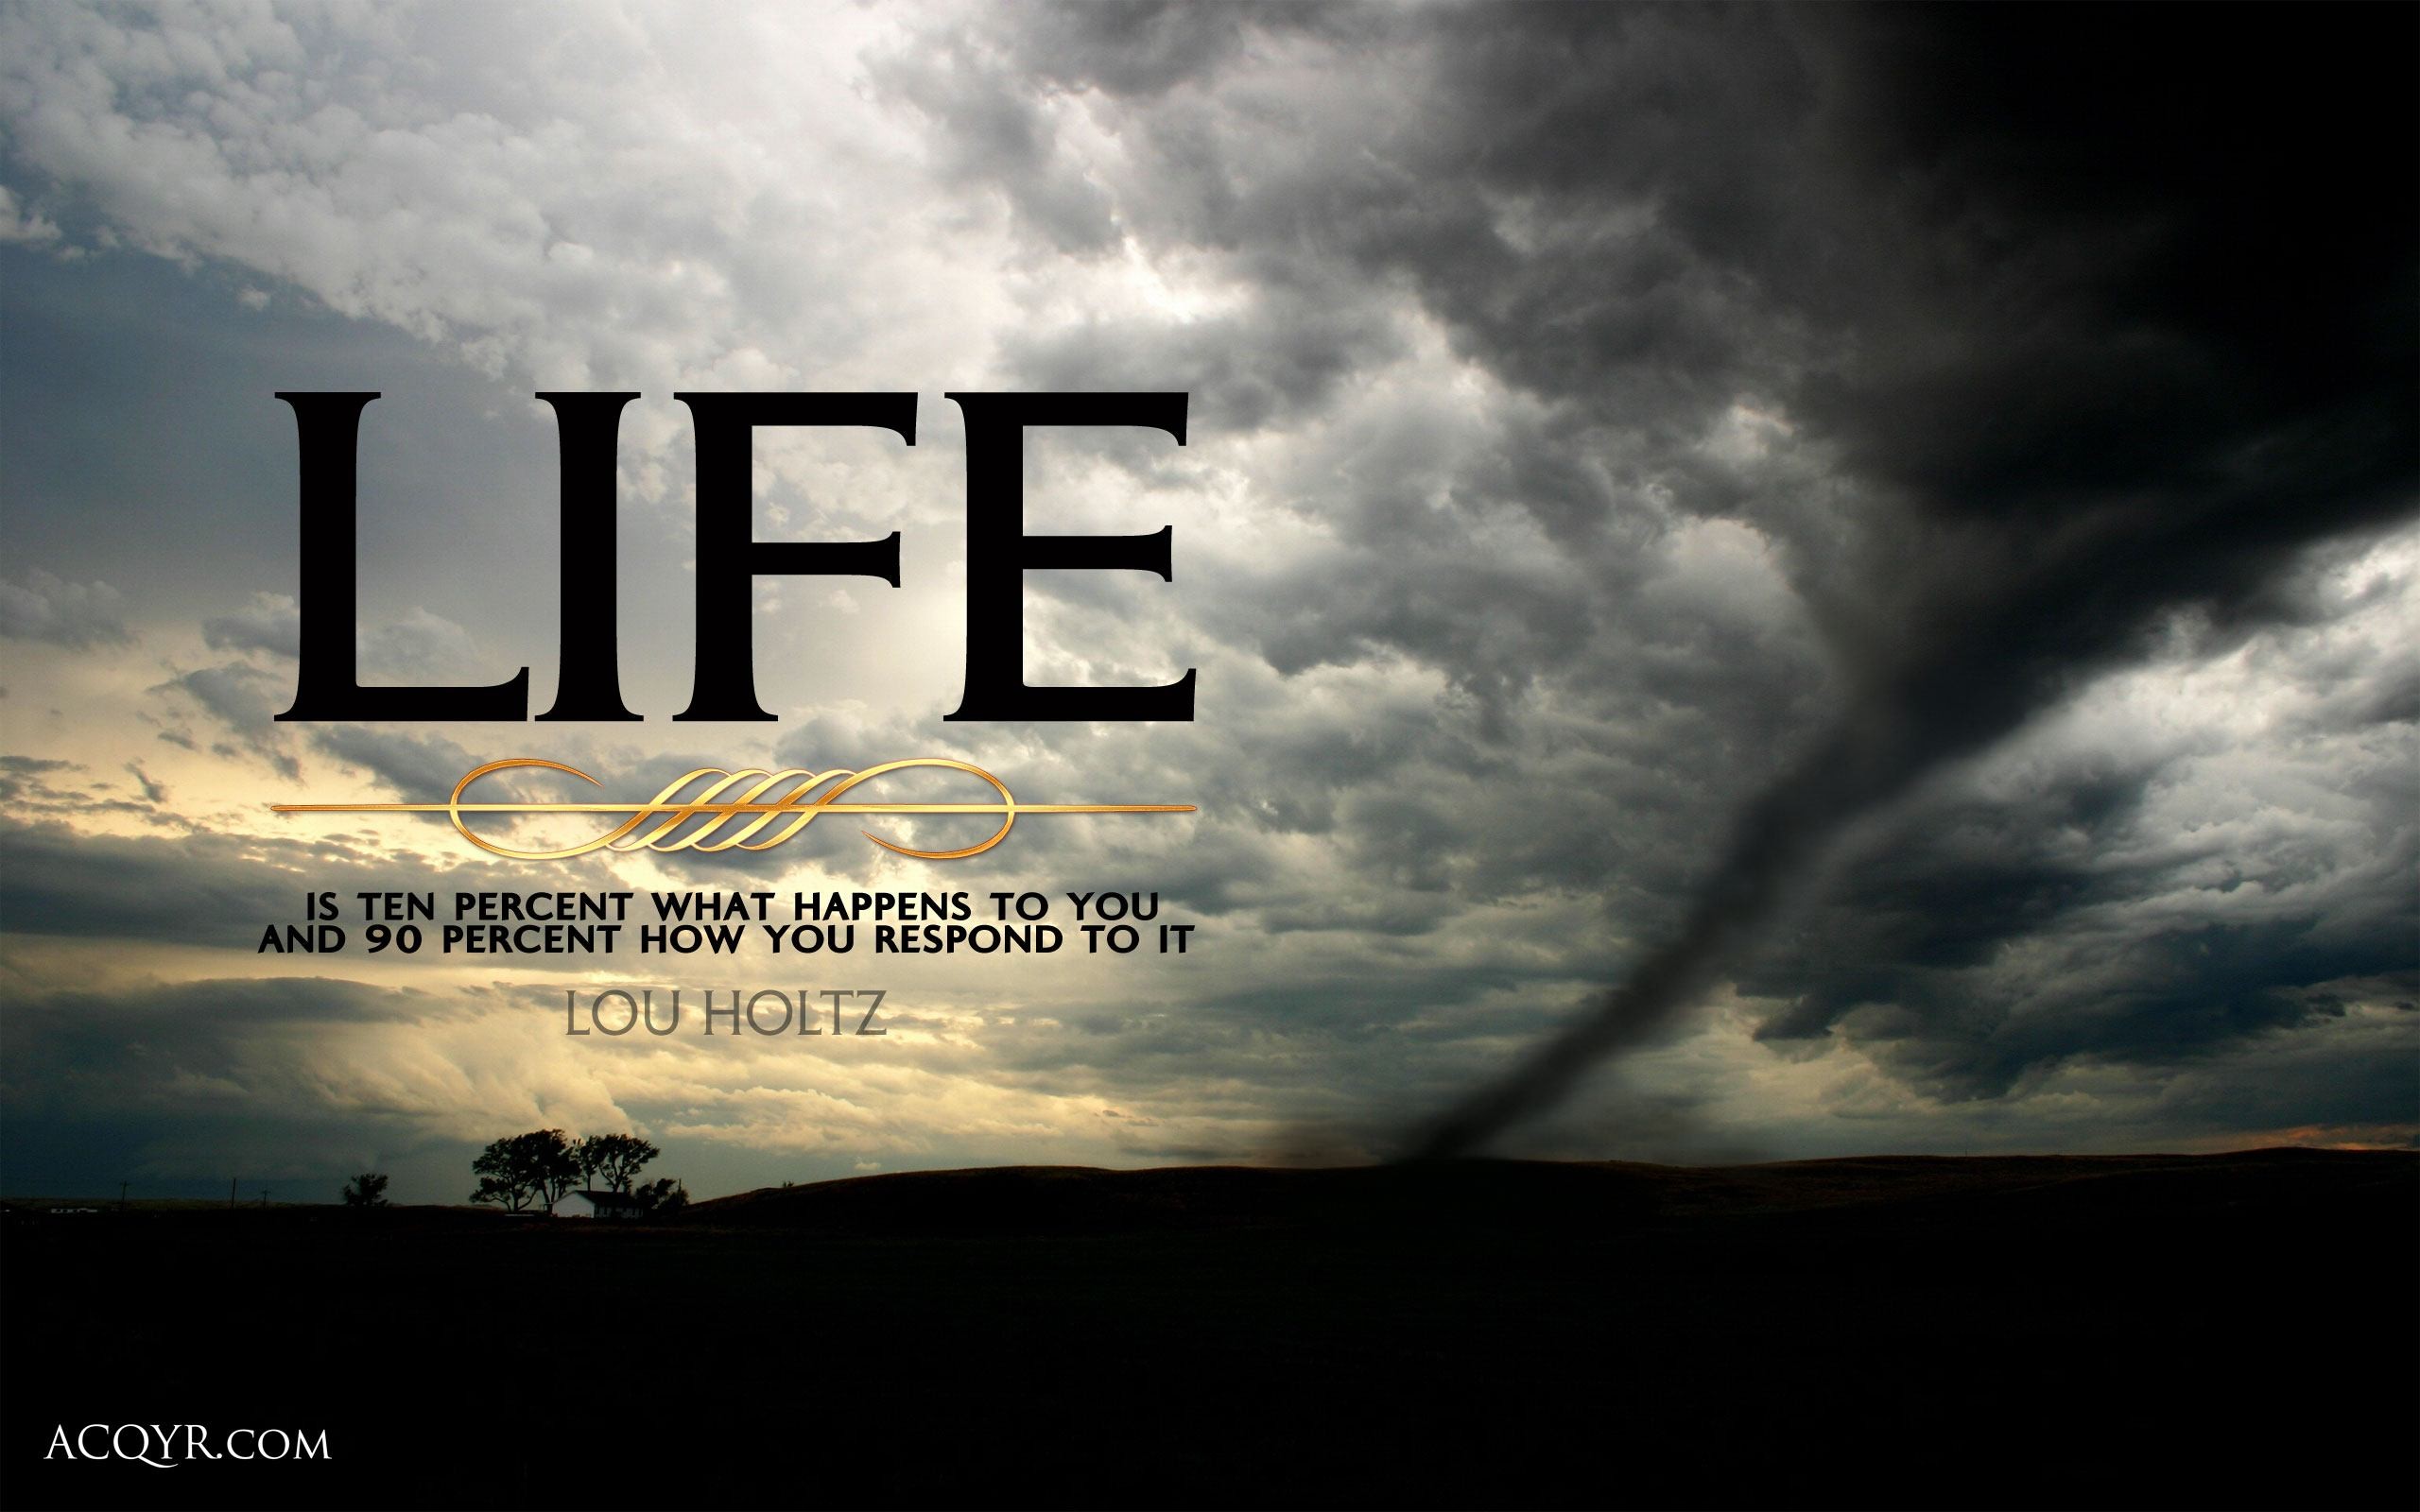 2560x1600 Inspiring Nature Wallpapers Picture For Desktop Wallpaper 2560 x 1600 px  1.2 MB widescreen christian quotes